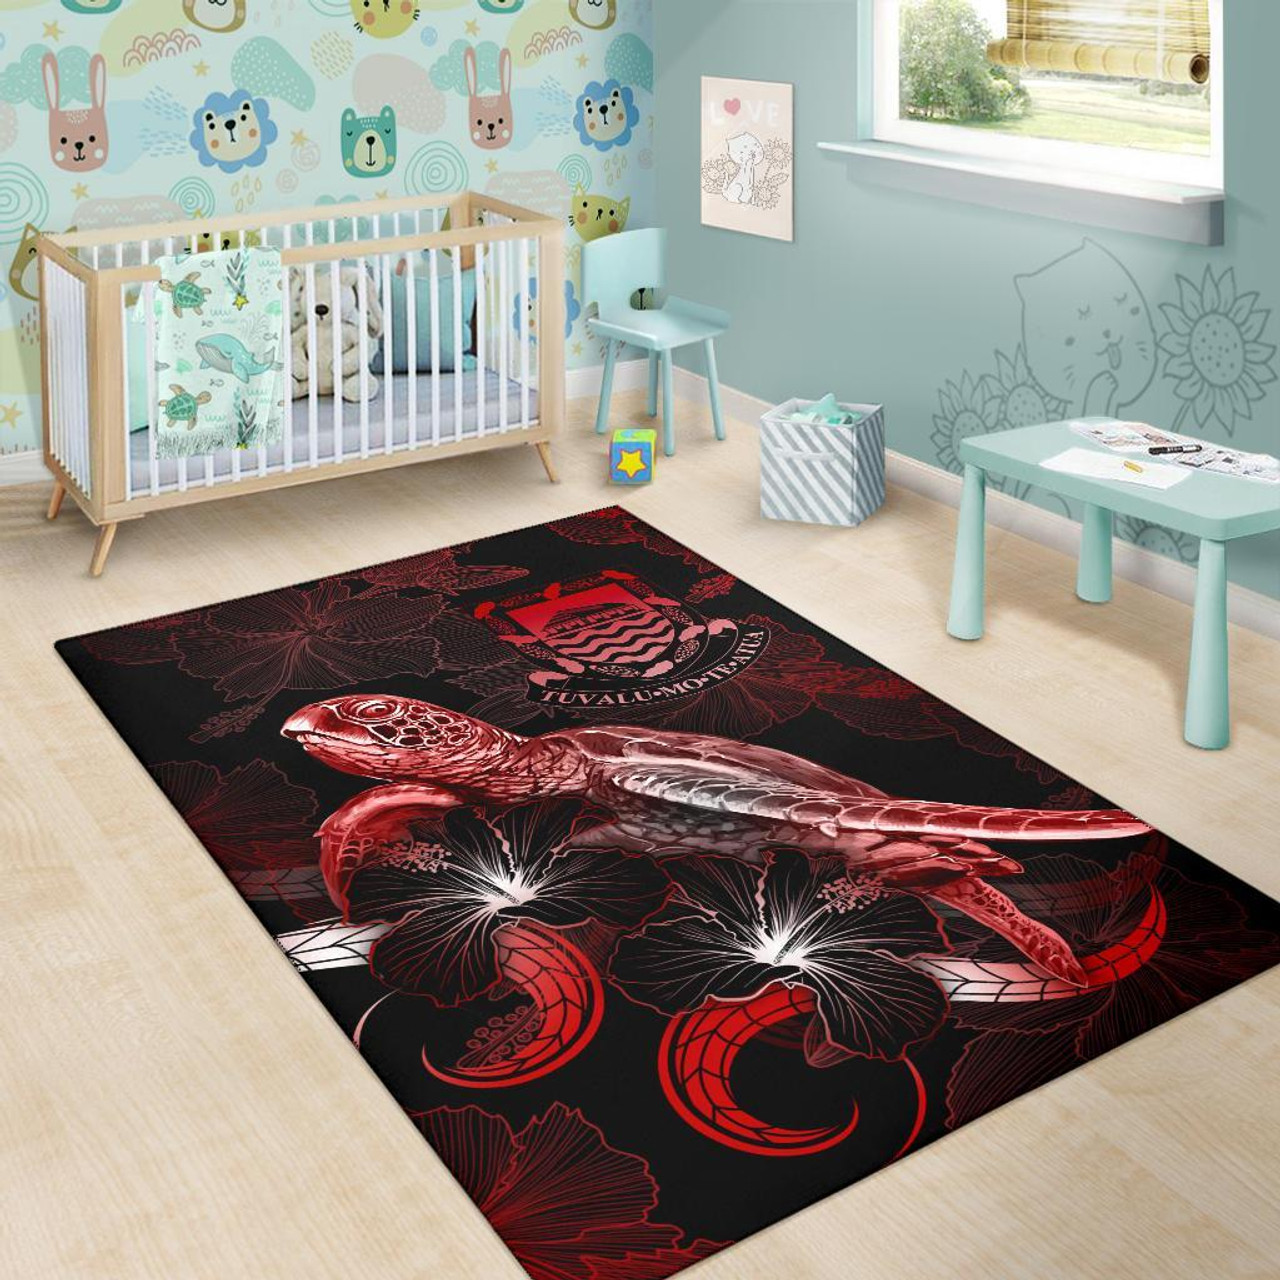 Tuvalu Polynesian Area Rugs - Turtle With Blooming Hibiscus Red Polynesian 6